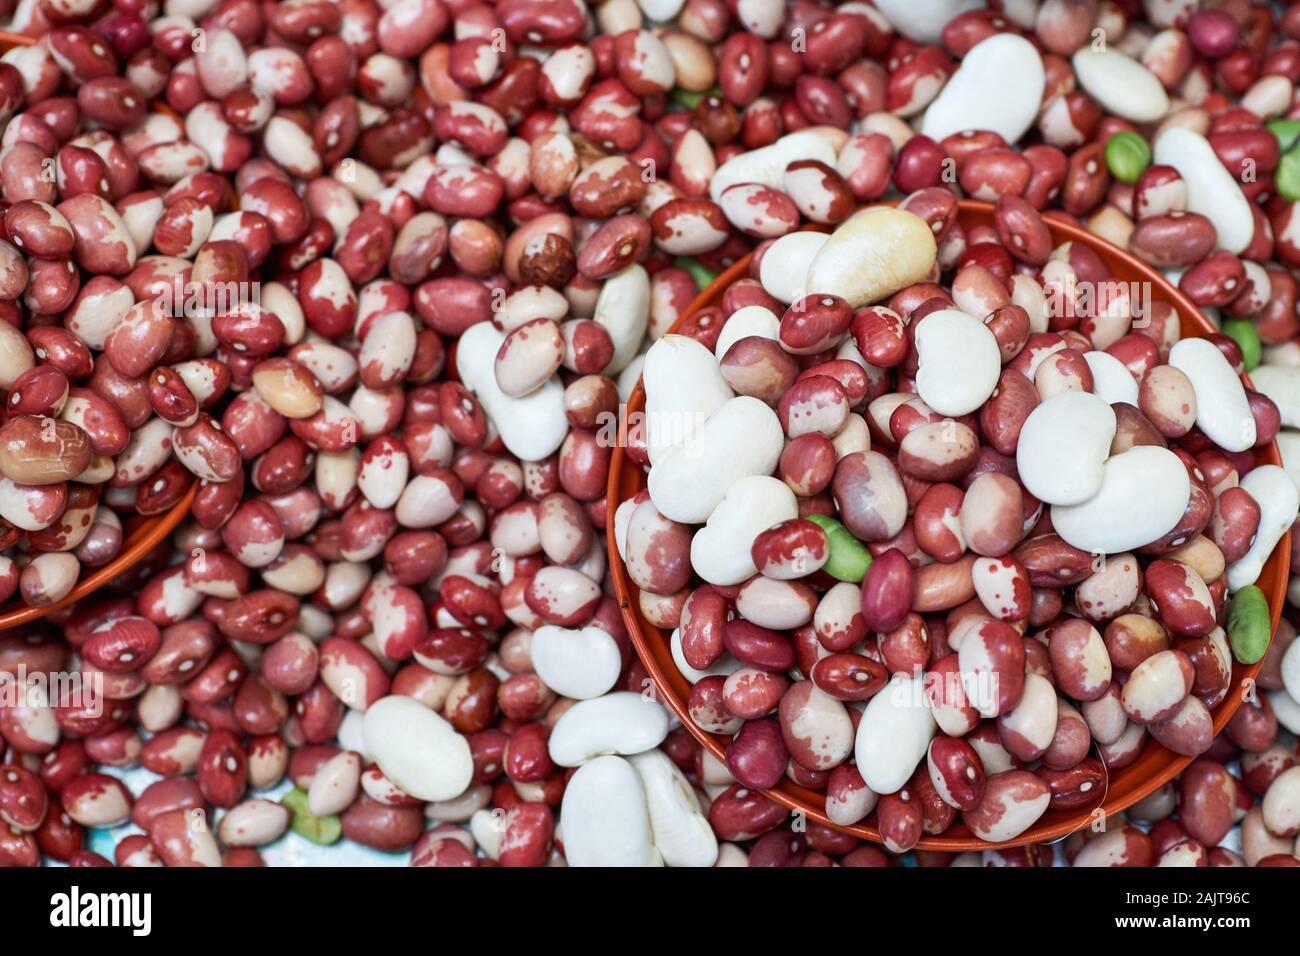 Red and white dried beans for sale at Gwangjang Market in Seoul, South Korea. Stock Photo